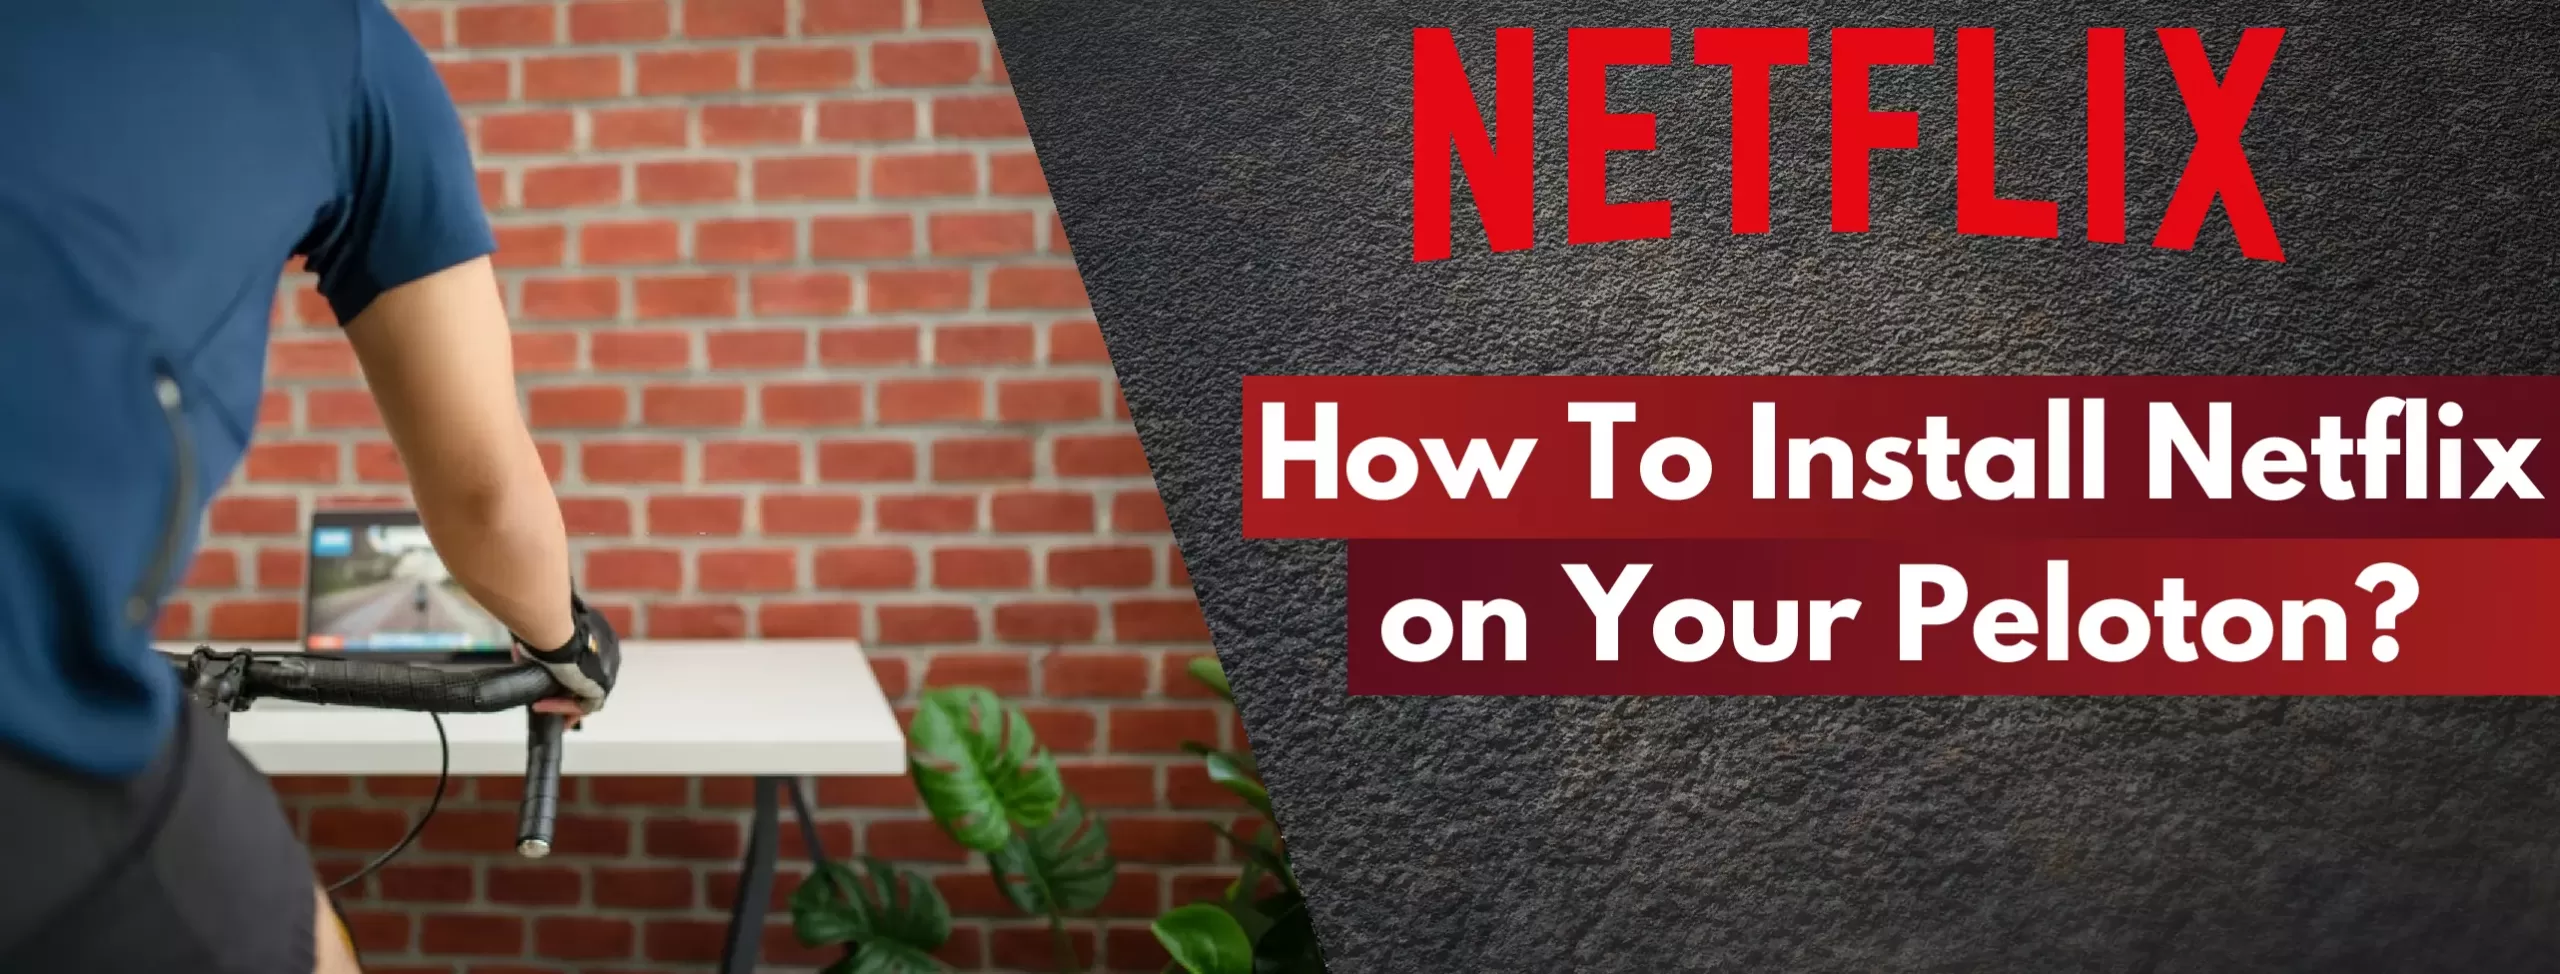 How To Install Netflix on Your Peloton